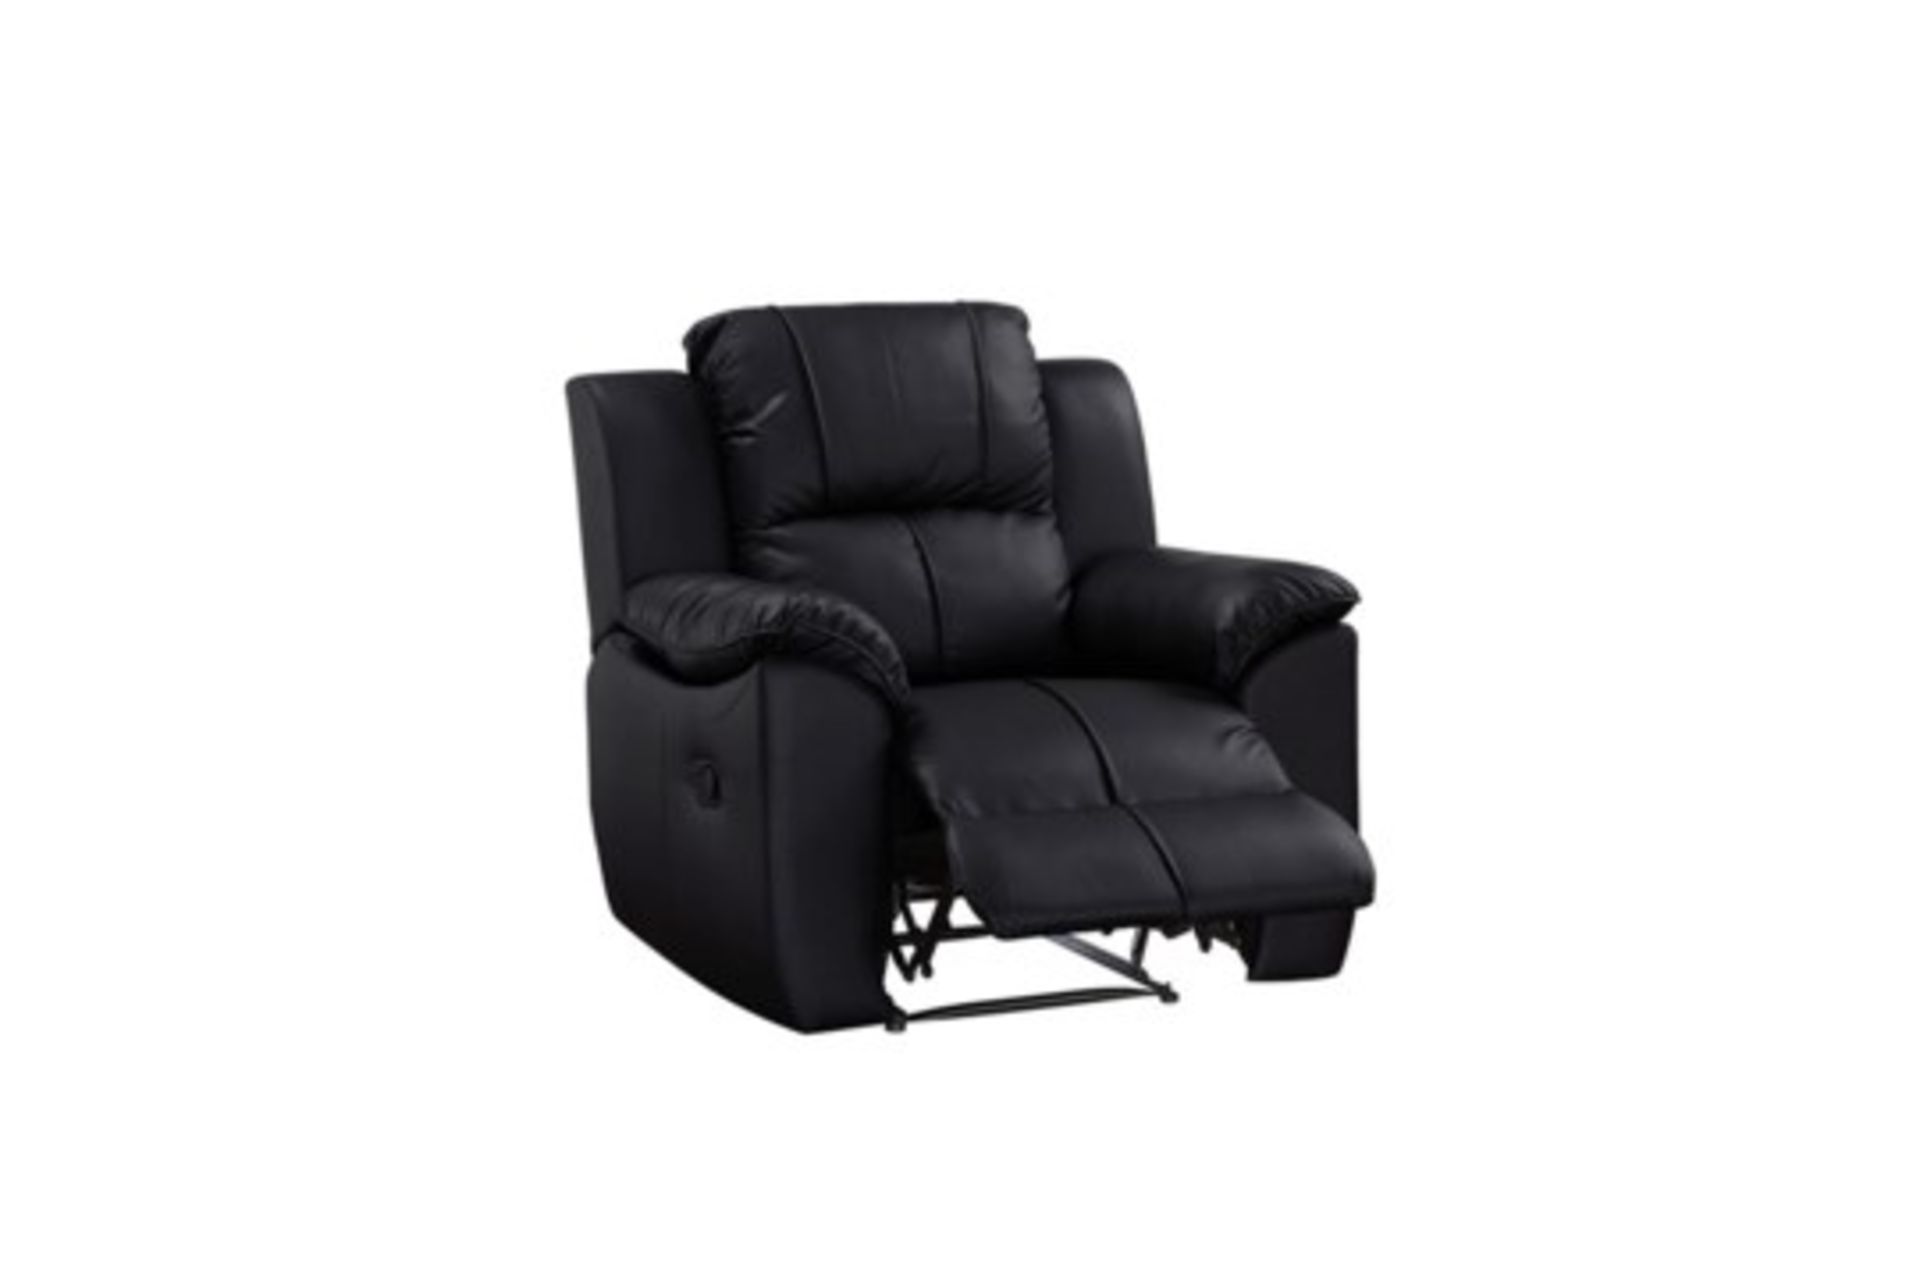 Boxed Black Leather Recliner Single Sitting Room Arm Chair RRP £325